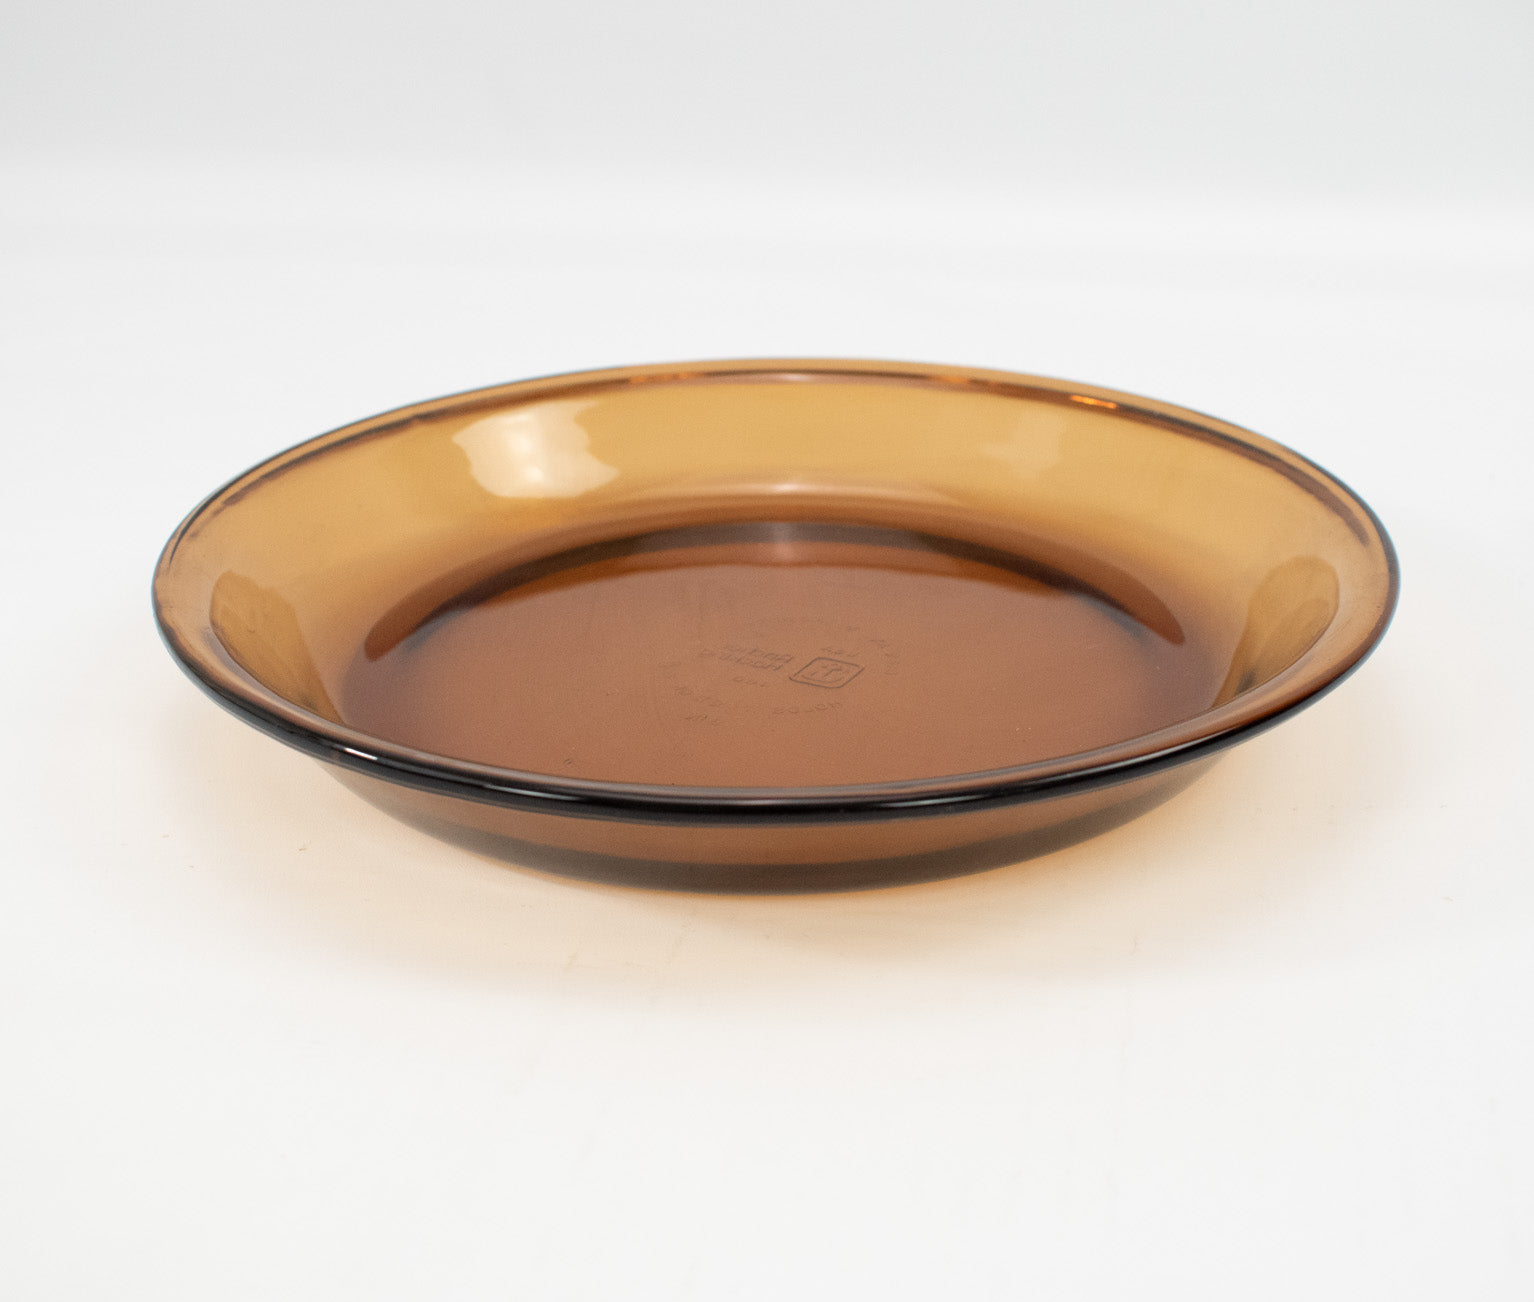 Achor Hocking Brown Glass Cooking Bowl 460 9 Inch - 75. QT